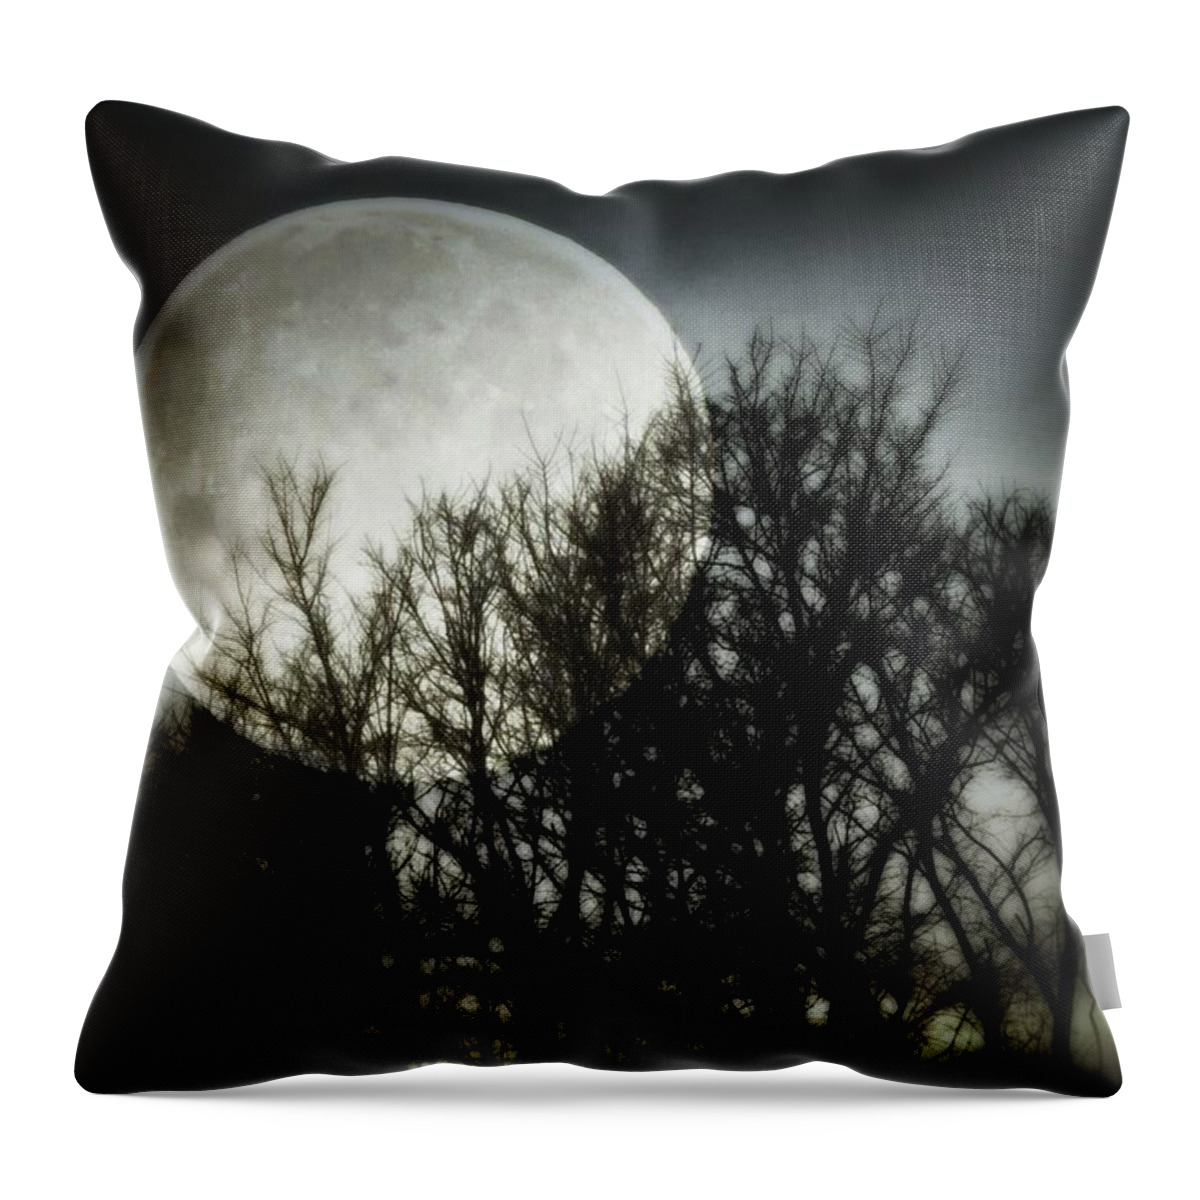 Moonlight Throw Pillow featuring the photograph Moonlight by Marianna Mills